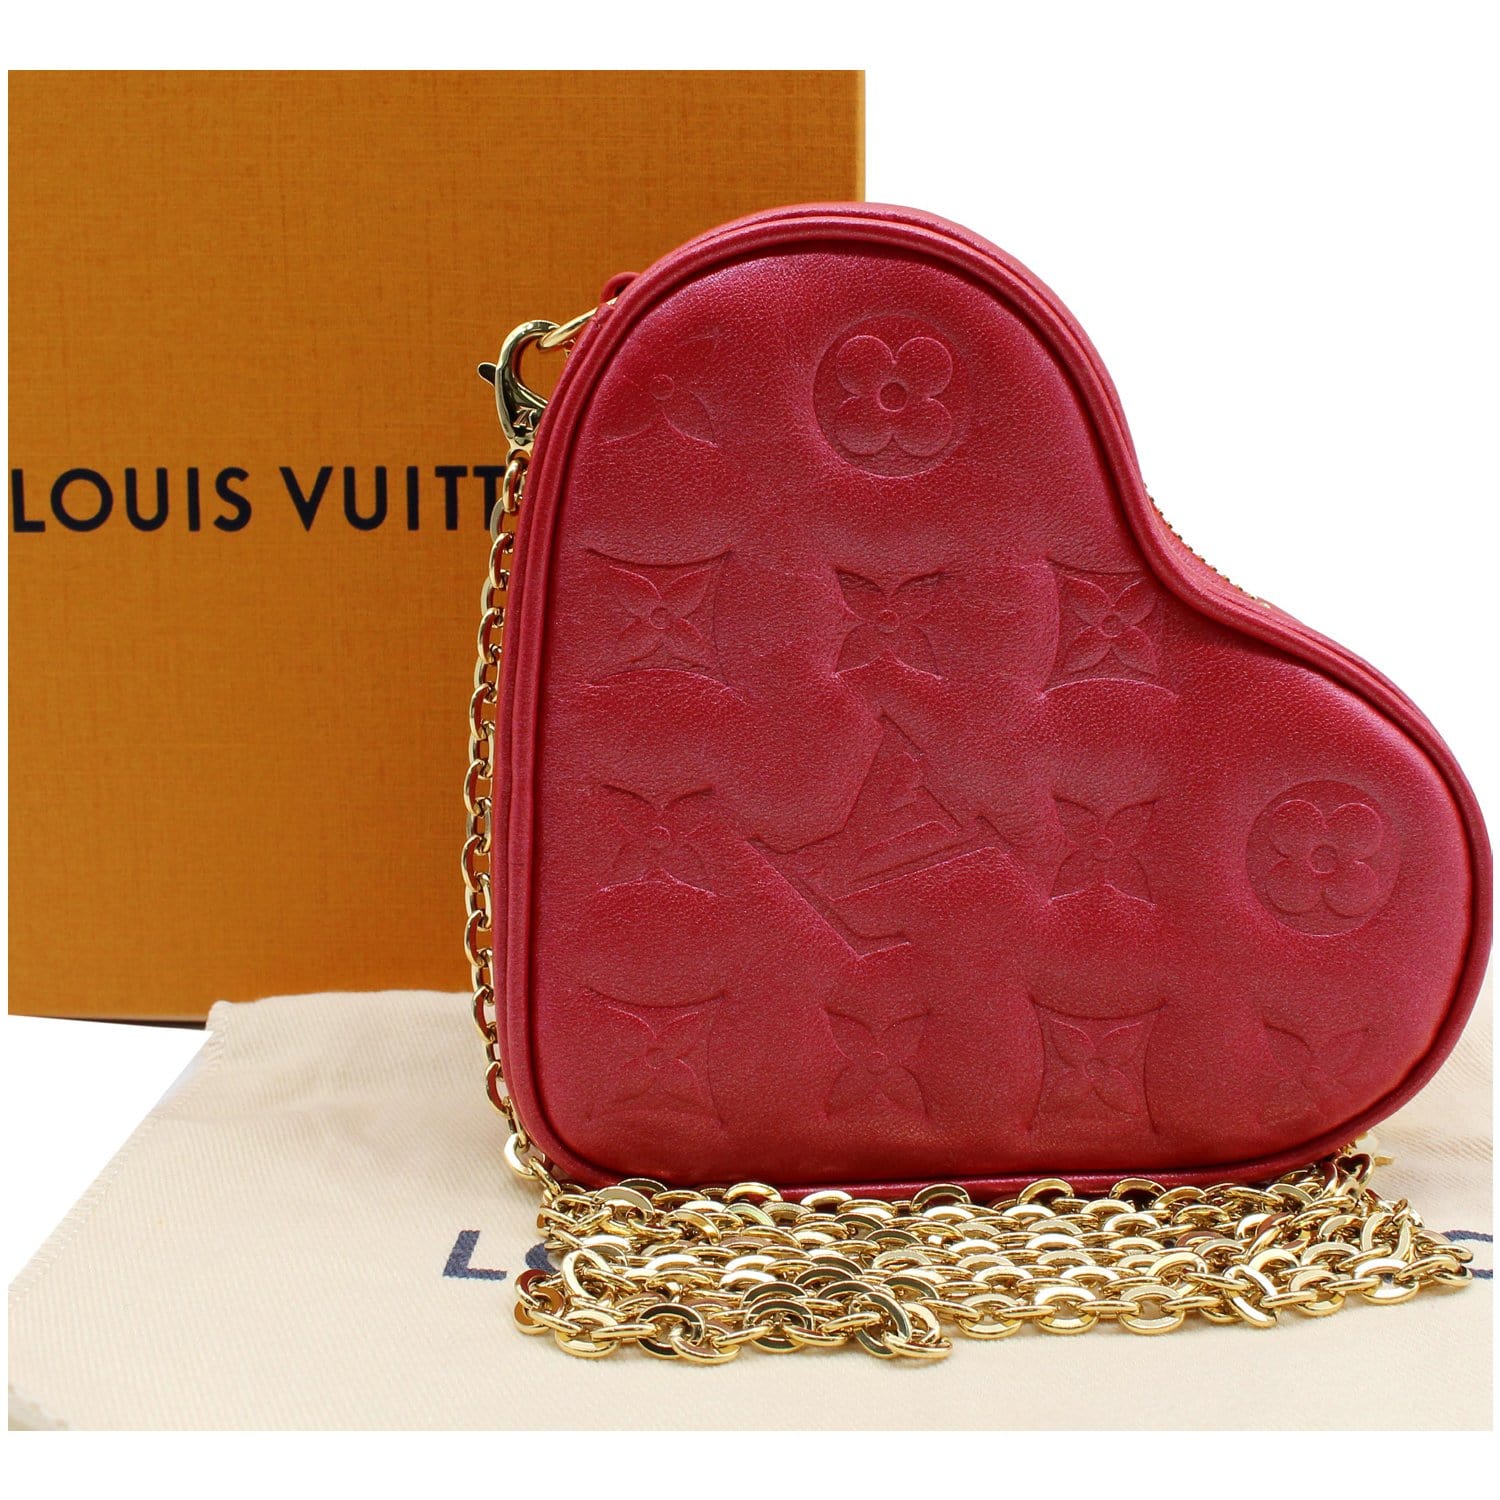 We're in Love With Louis Vuitton's Heart-Shaped New Wave Bag